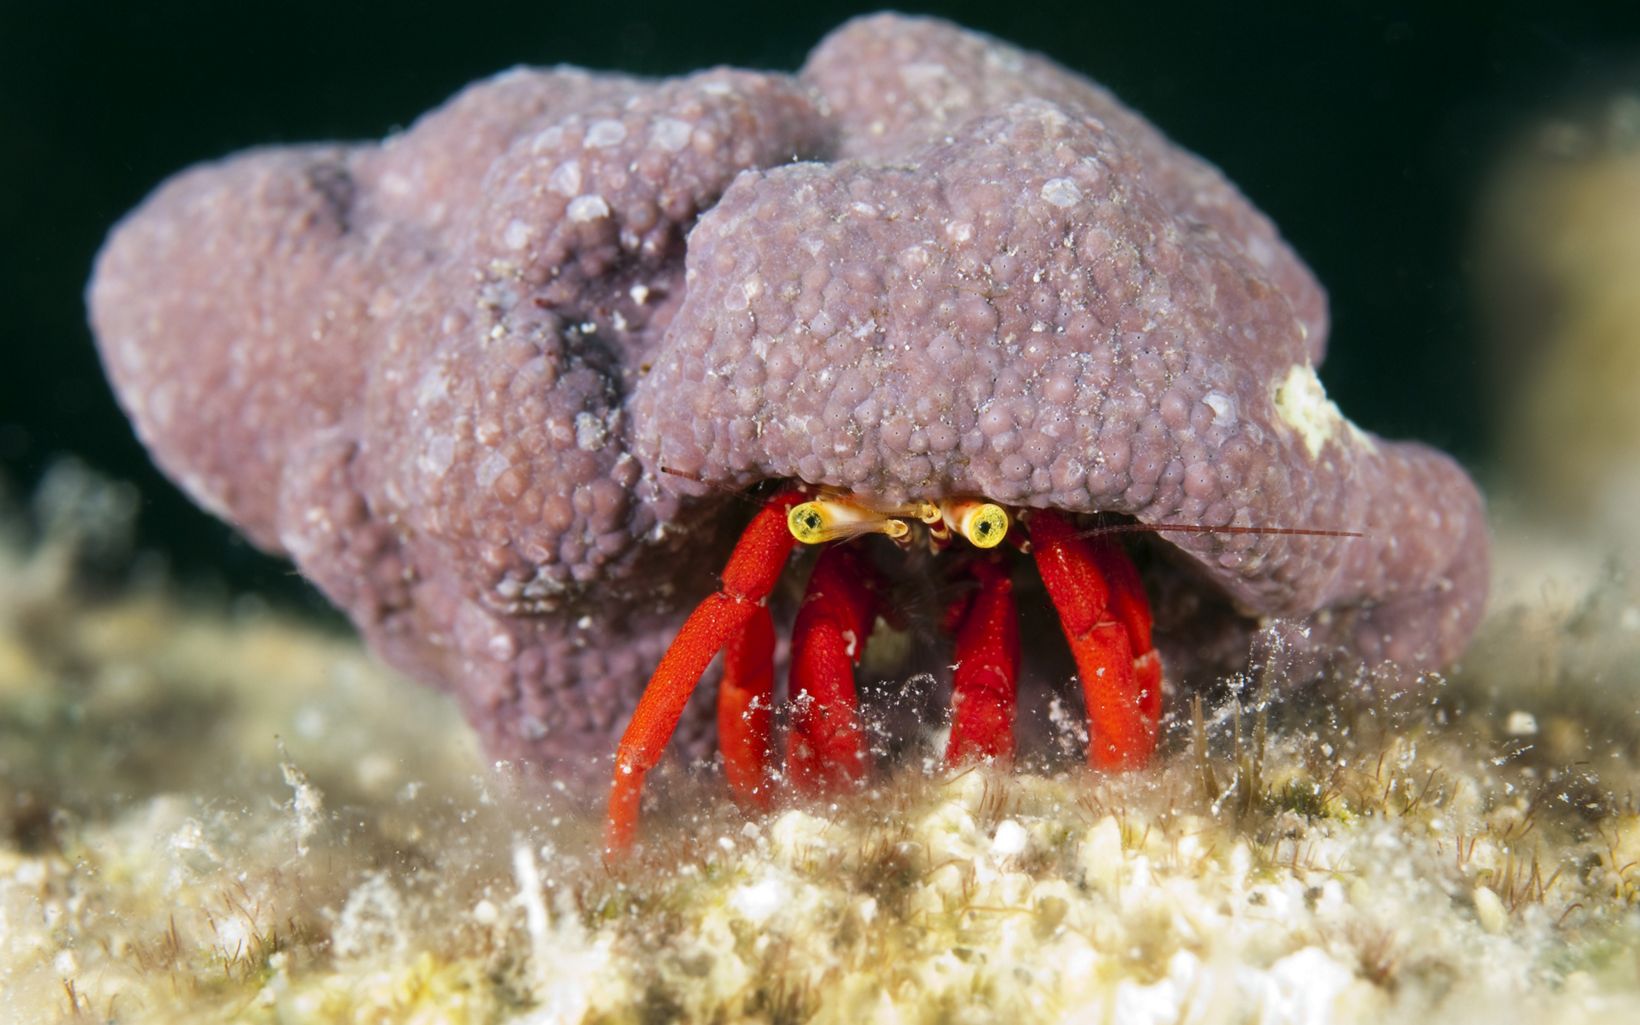 A place to call home A red reef hermit crab photographed underwater at the Exuma Cays Land and Sea Park, Bahamas. © Jeff Yonover 